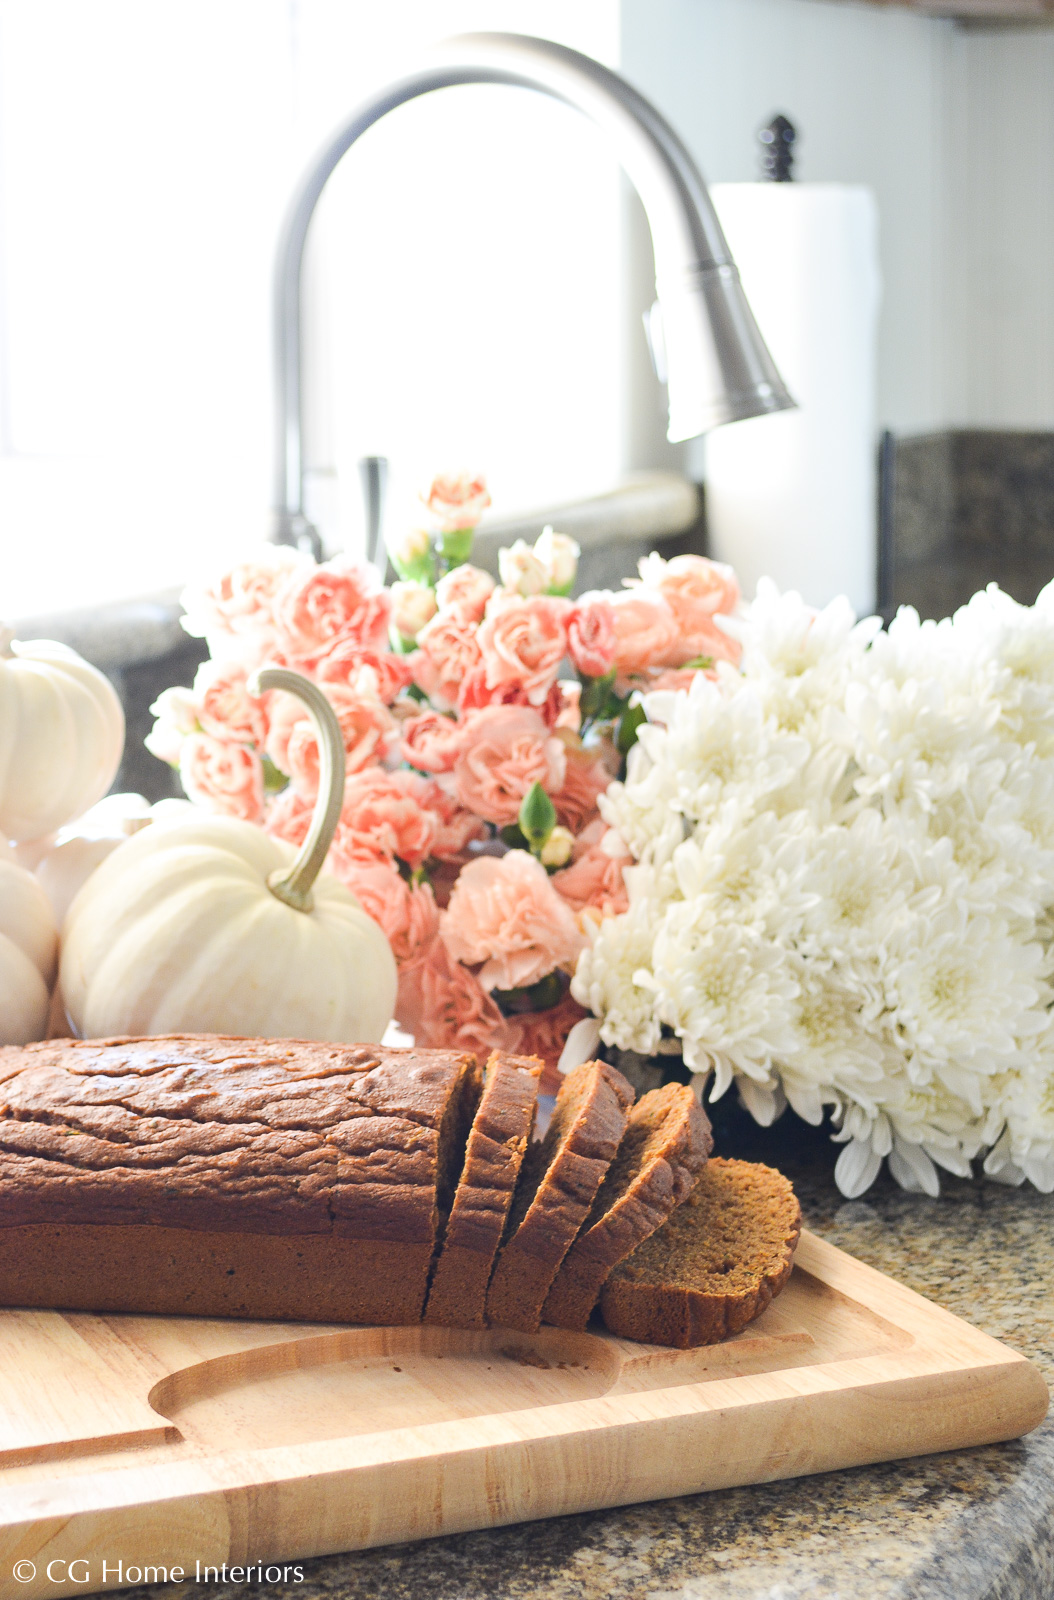 Healthy Pumpkin Zucchini Bread with Fall Flowers and white pumpkins